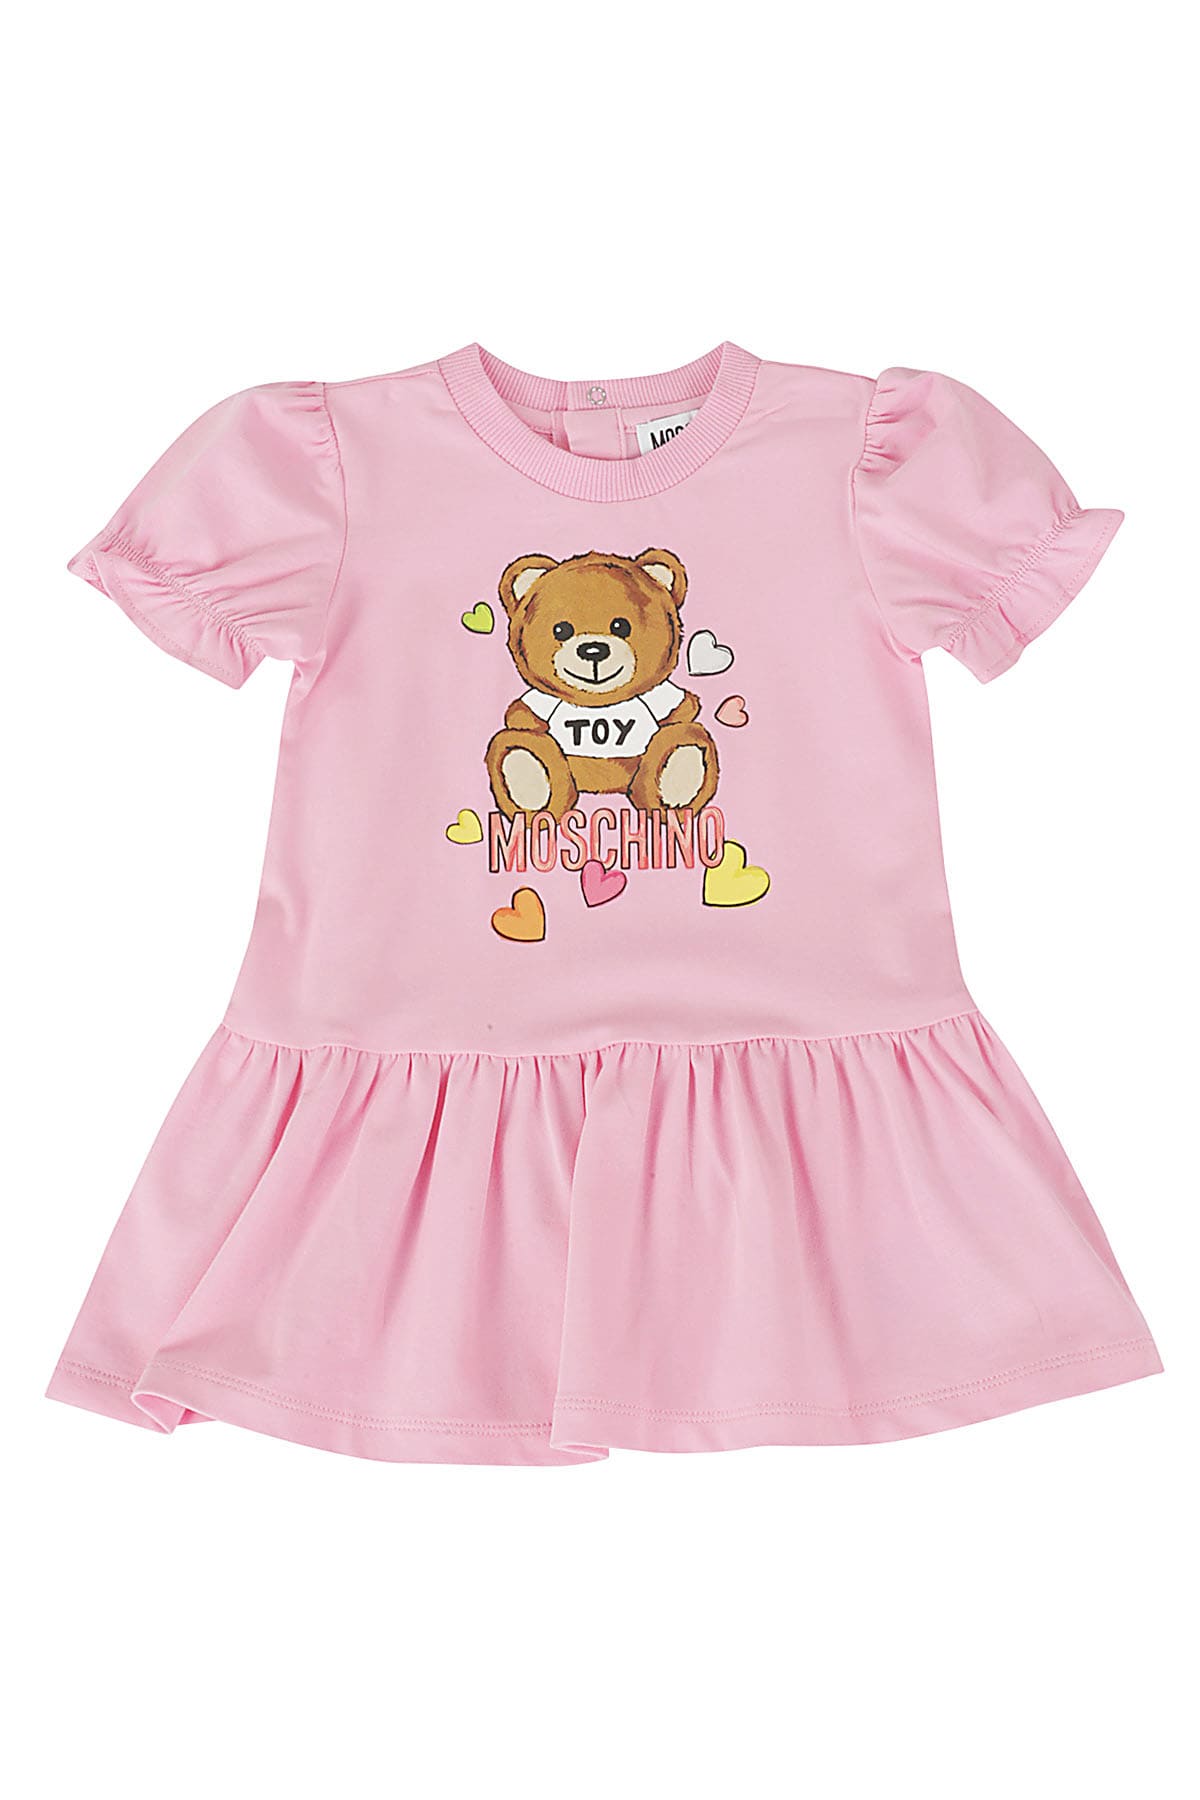 Moschino Babies' Dress In Sweet Pink